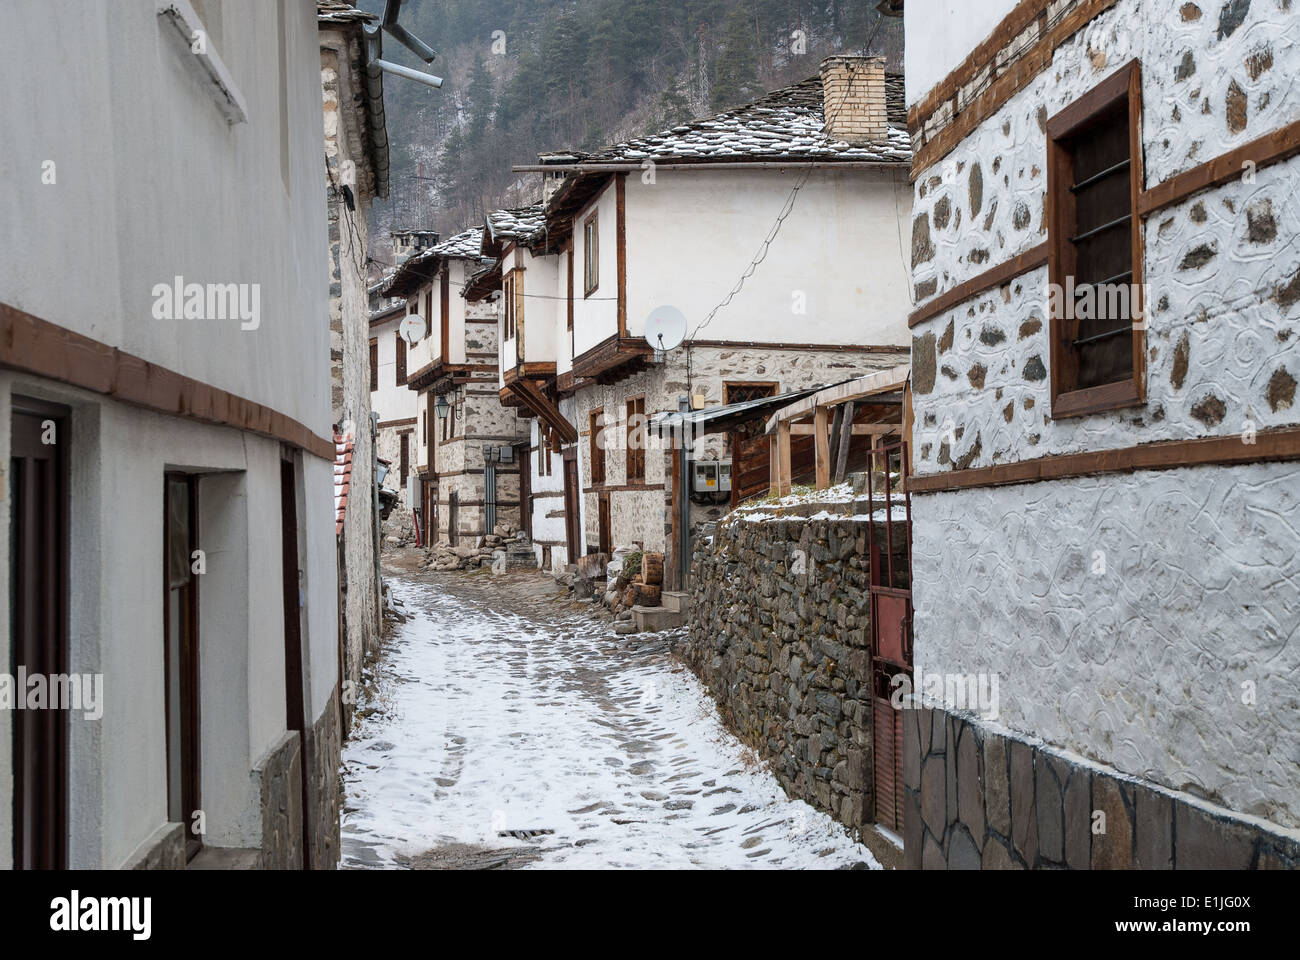 Street and buildings in the traditional village of Shiroka Laka in Bulgaria during winter Stock Photo